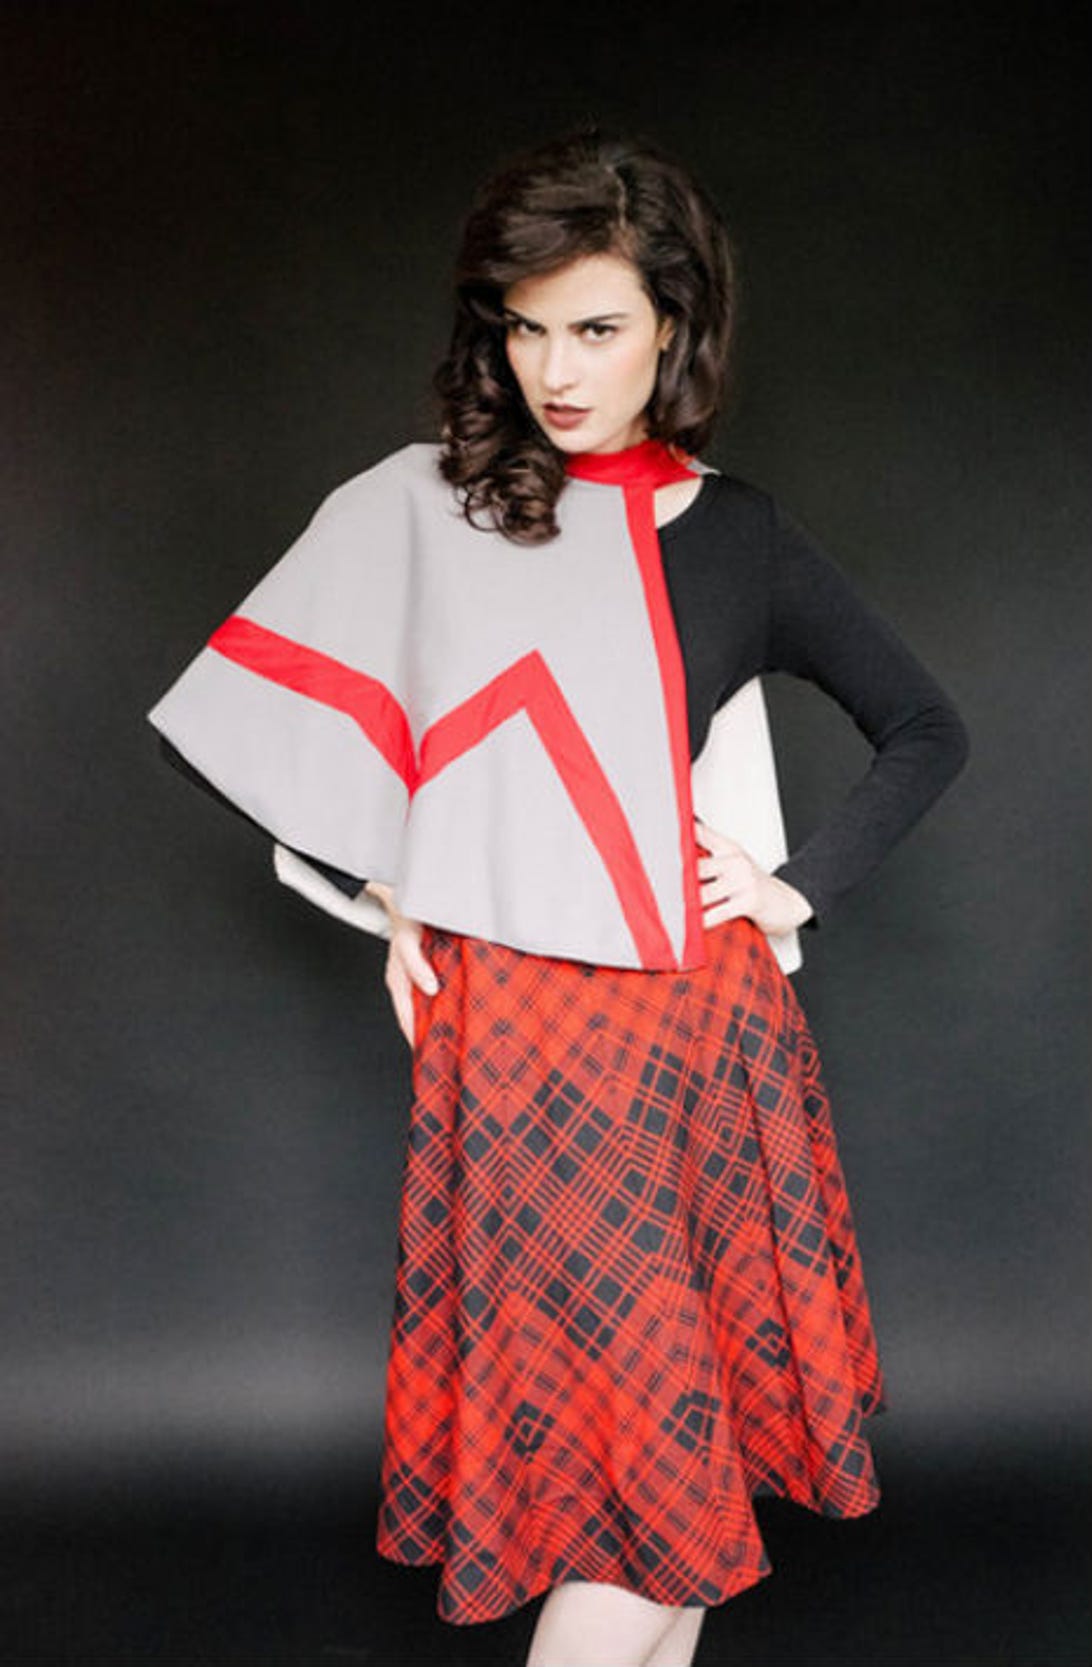 Do your best Audrey Horne bad girl impression with while wearing this Smoking the The Girls Room Caplet.